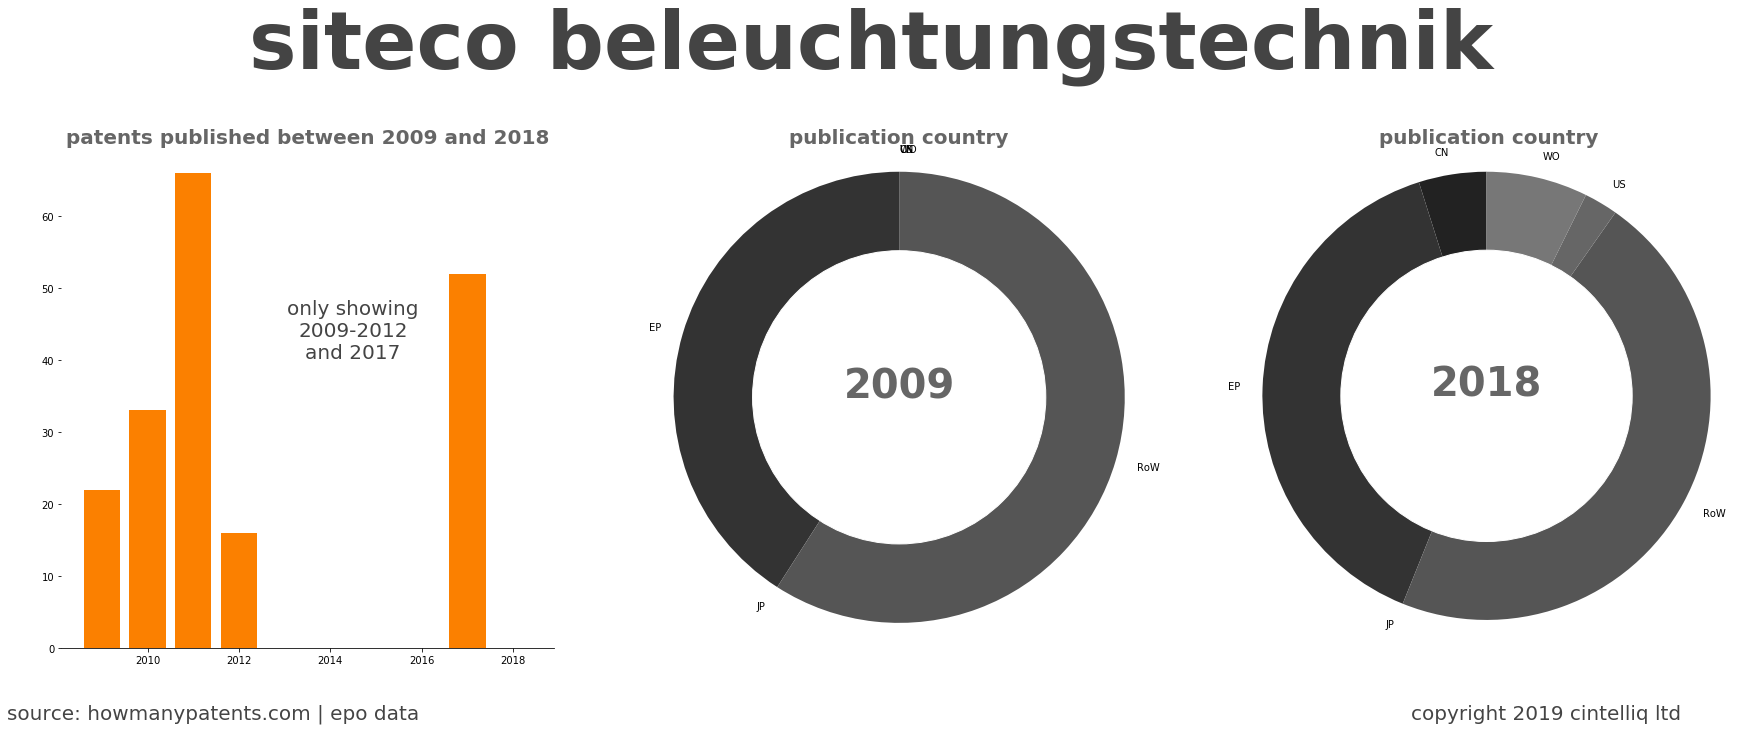 summary of patents for Siteco Beleuchtungstechnik